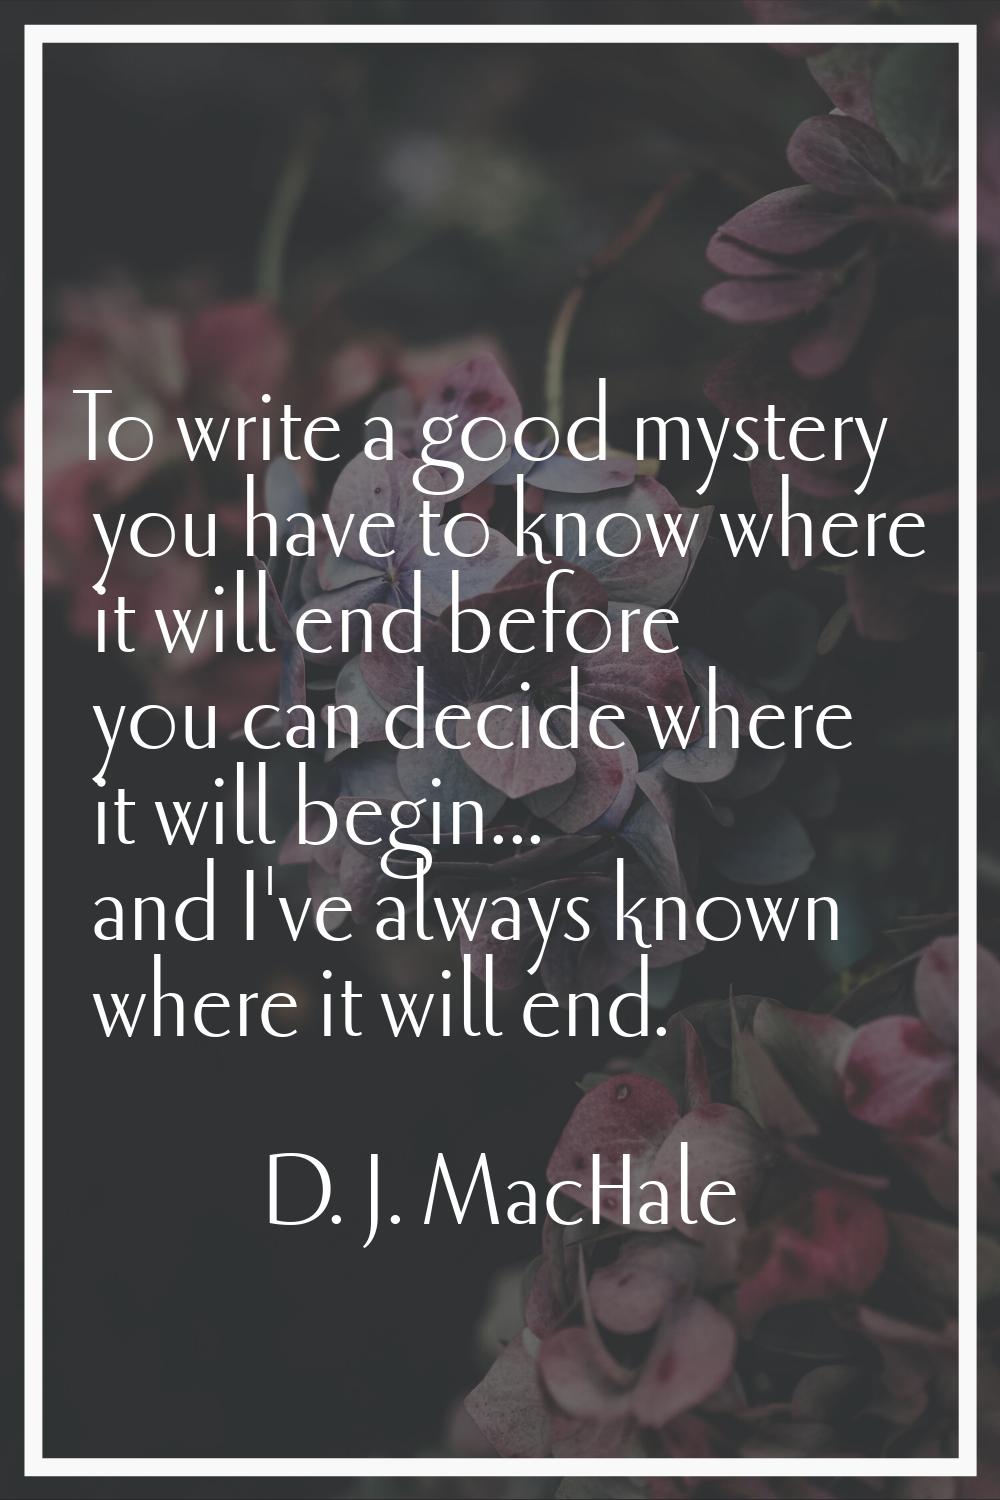 To write a good mystery you have to know where it will end before you can decide where it will begi